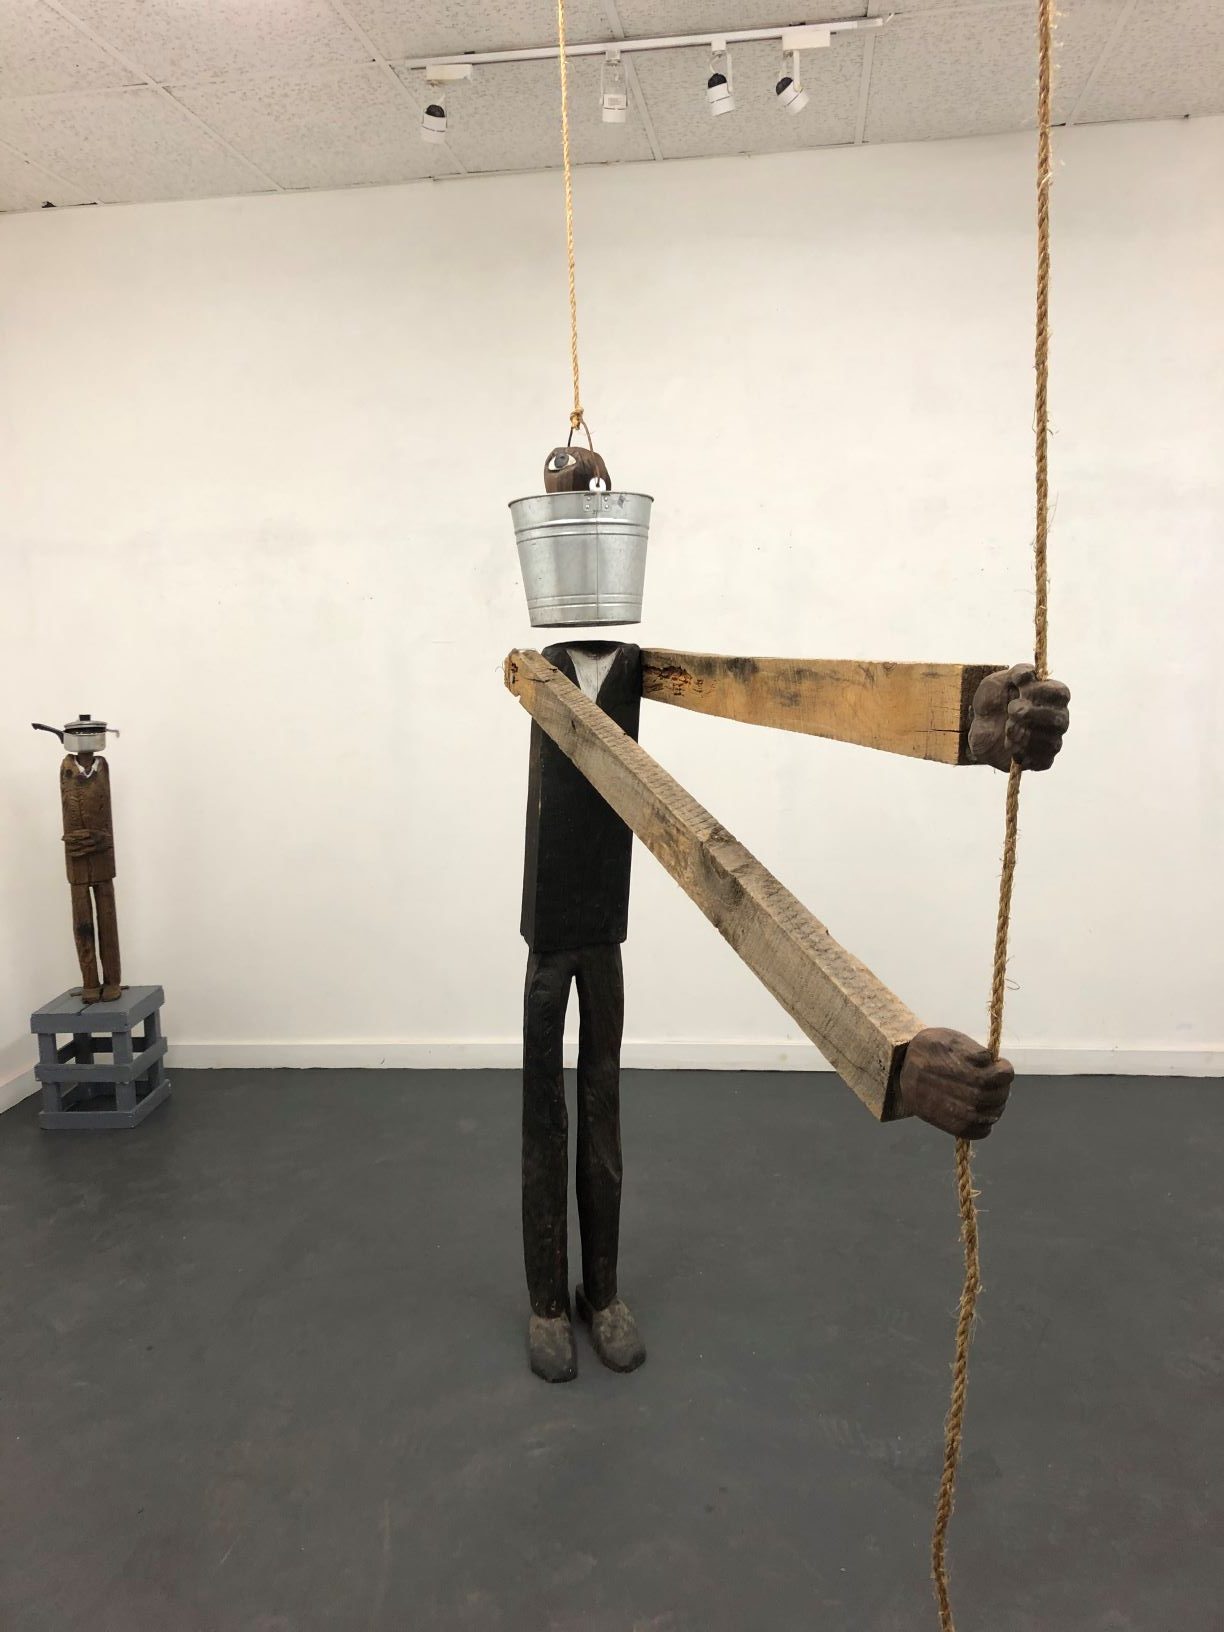 Jack, Wood and rope and pail and water, by Michael Tillyer